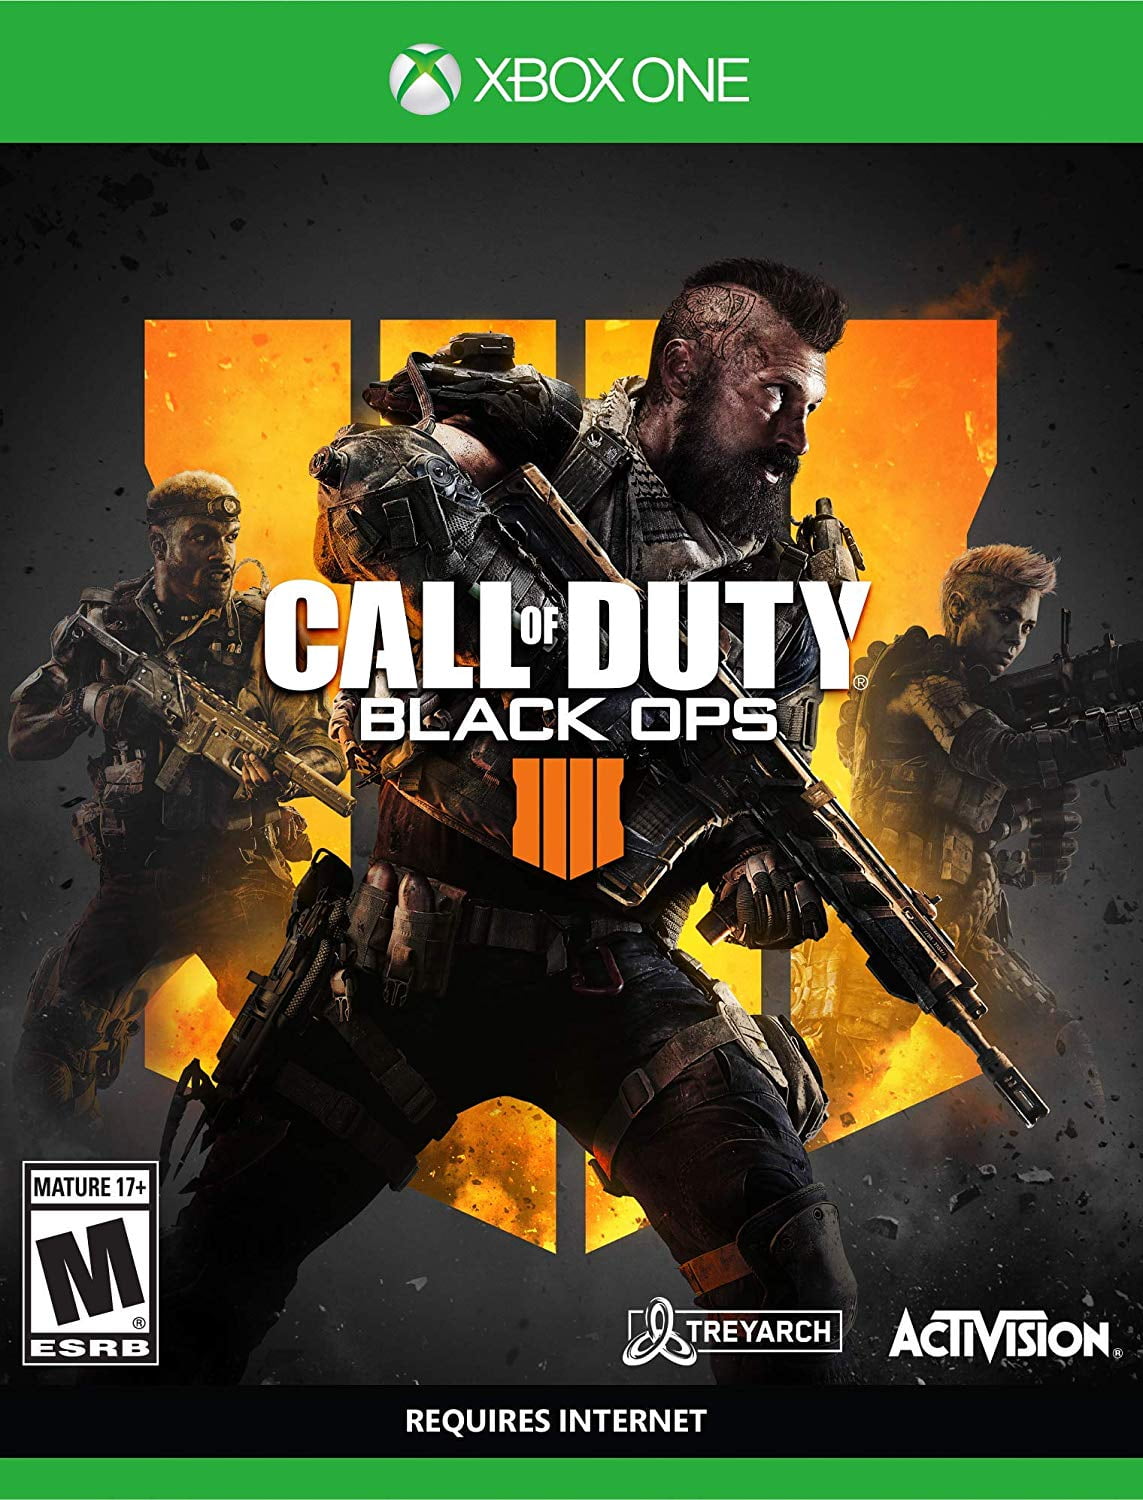 Call of Duty Black Ops 4, Activision, Xbox One, Physical, 047875882294